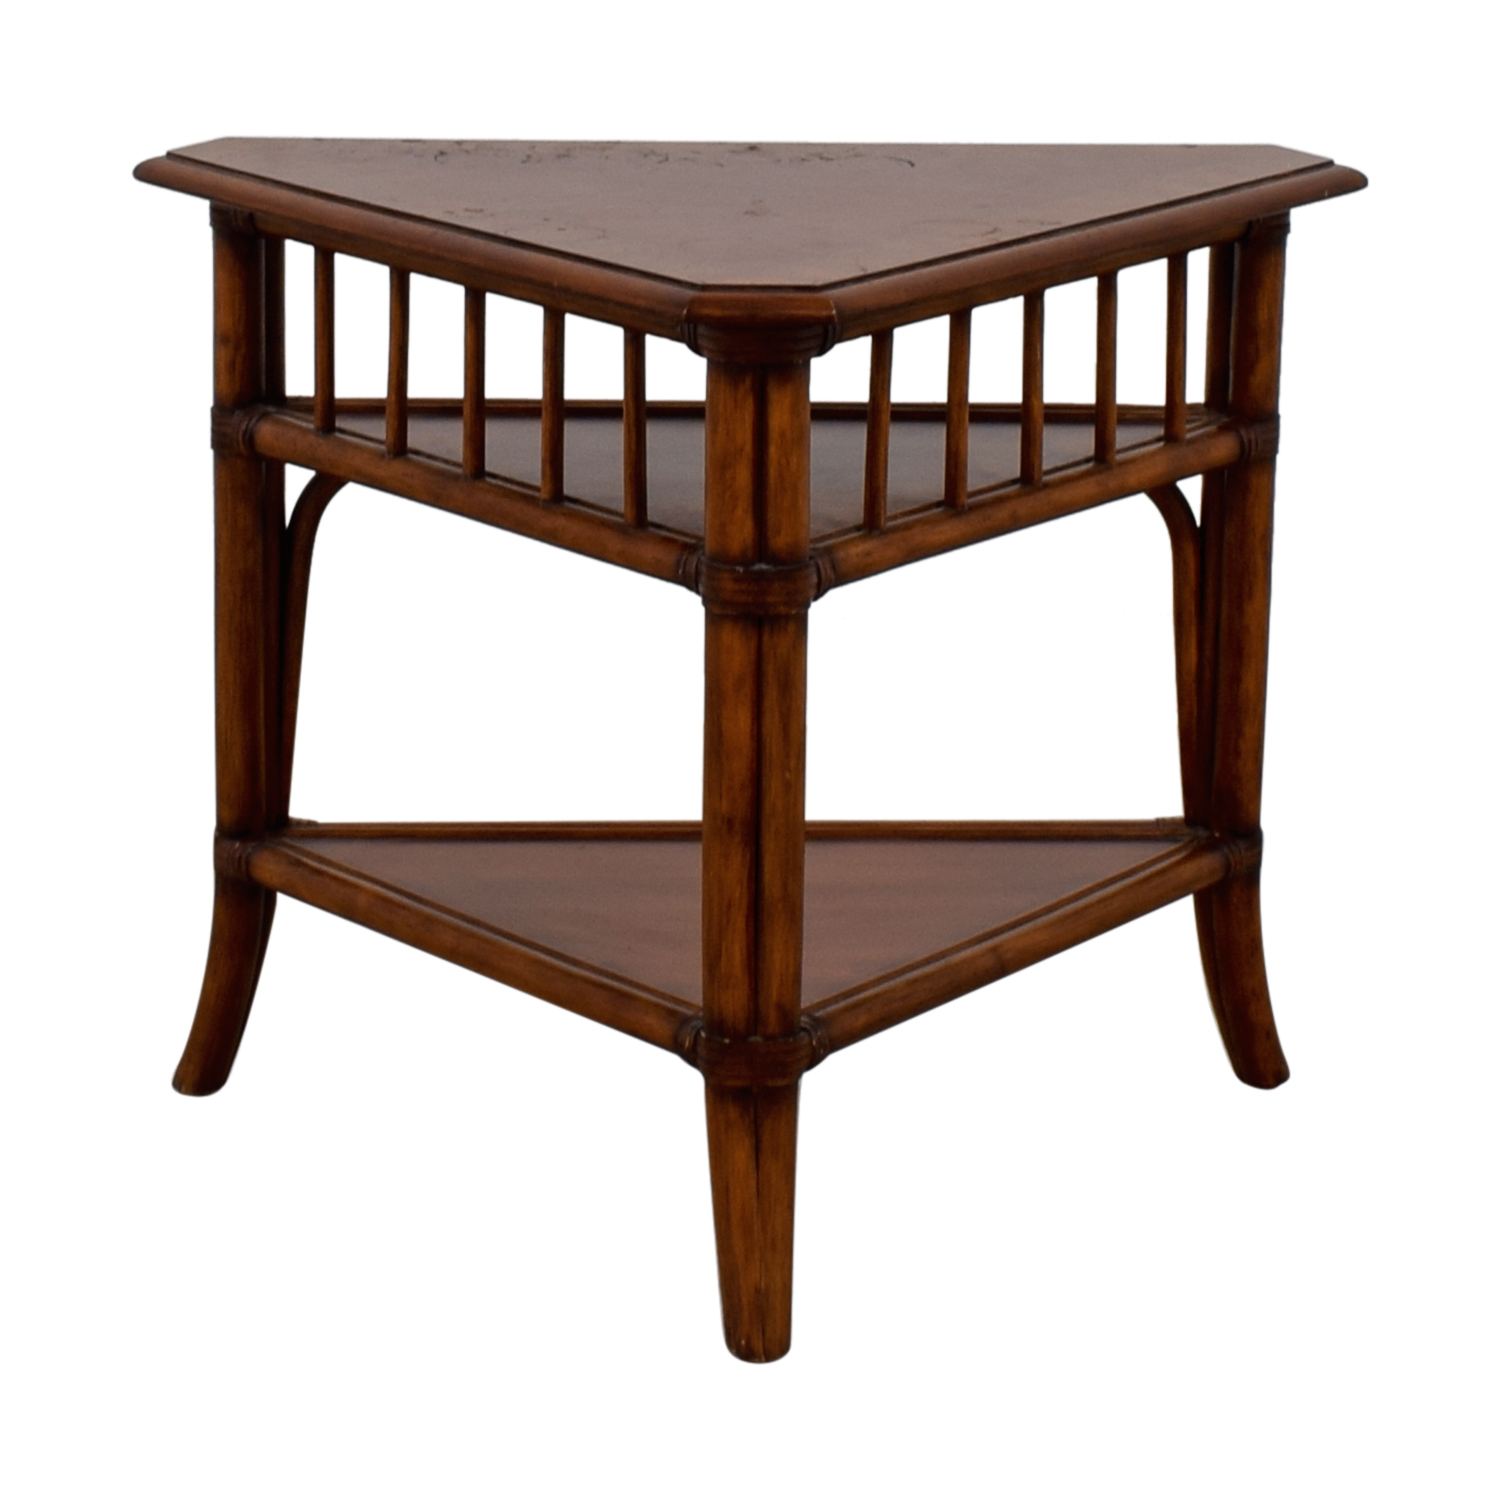 off ethan allen triangular corner lamp table stand rattan wood side triangle accent tables pottery barn wells chair dale tiffany pendant thin entrance ikea accessories vintage